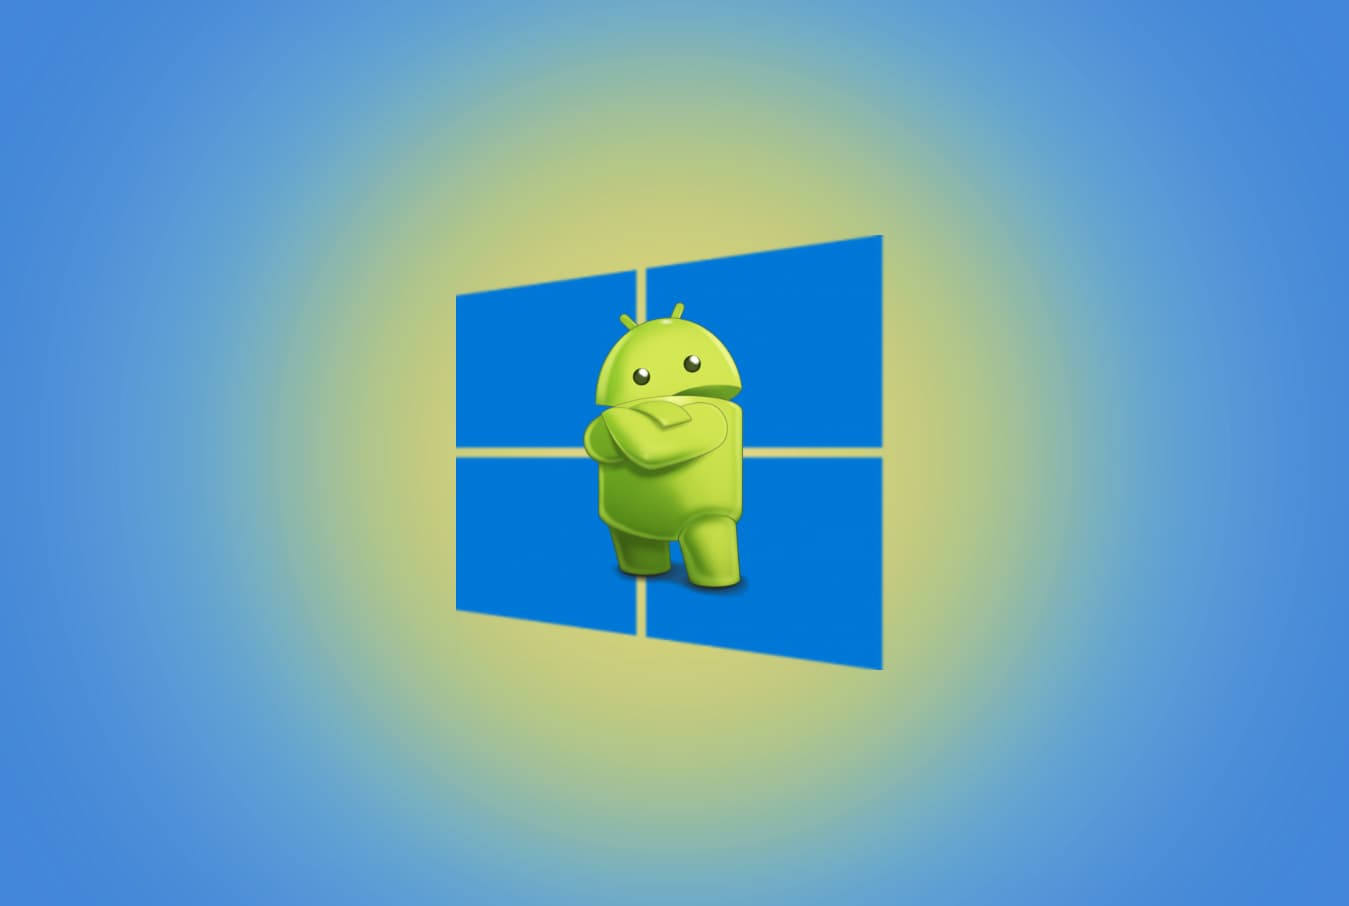 Future can bring Microsoft Windows and Android together